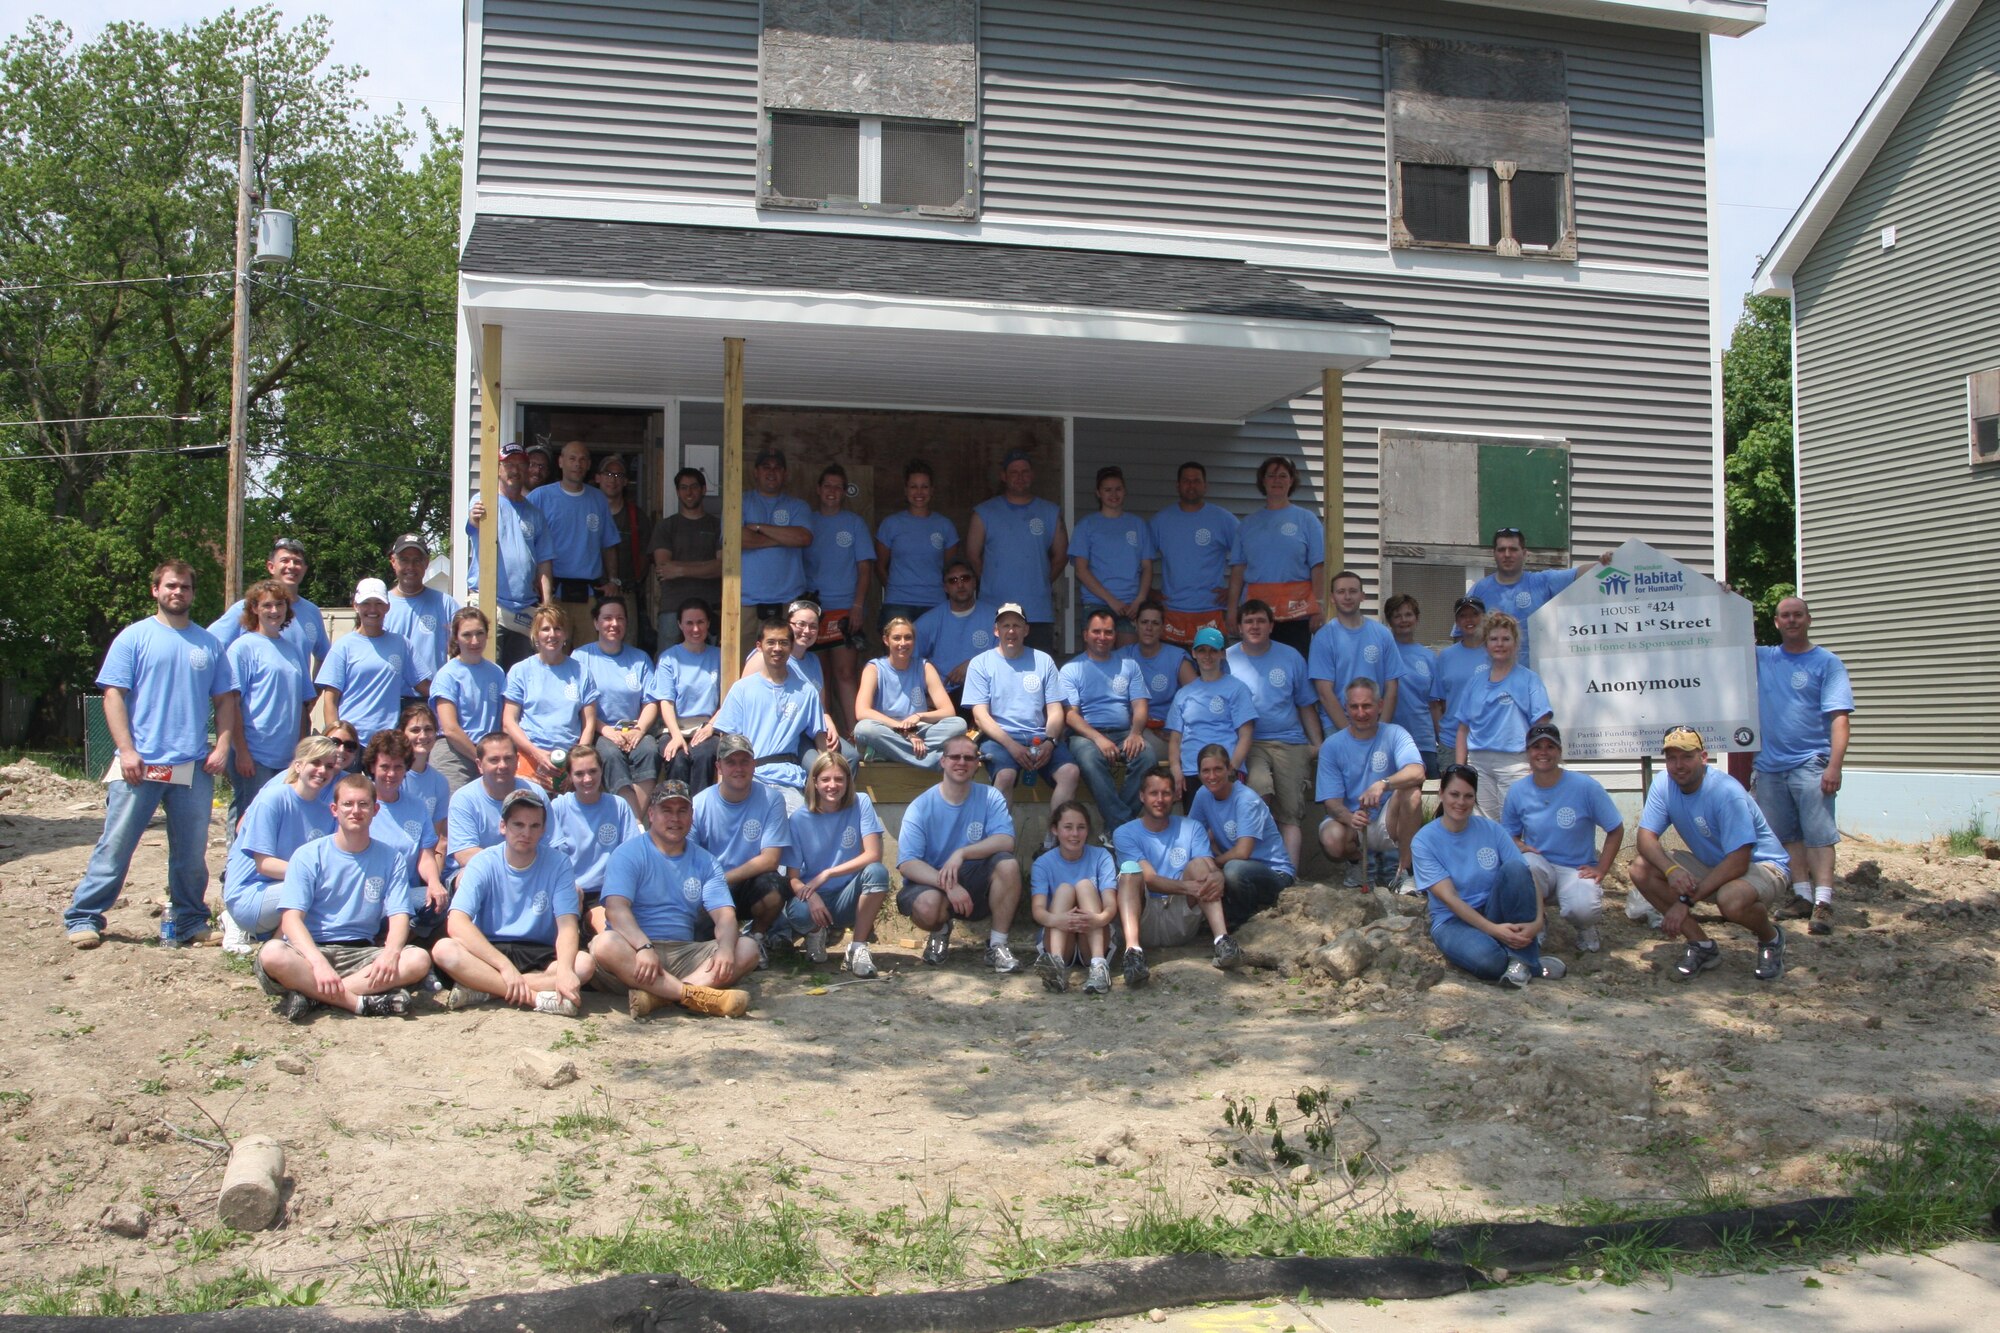 Sixty-Five Airmen and family members from the 128th Air Refueling Wing gather in front of an under-construction house in Milwaukee during a volunteer effort with Habitat for Humanity on Saturday, June 4, 2011.   The Airmen hanged drywall in four houses.  1st Lt. Gregory Damask, the 128th Air Refueling Wing Logistics Readiness Officer, organized the volunteer effort, and he looks forward to Airmen from the 128 ARW volunteering with Habitat for Humanity next year.  (U.S. Air Force photo by Master Sgt. Kenneth Pagel / Released)